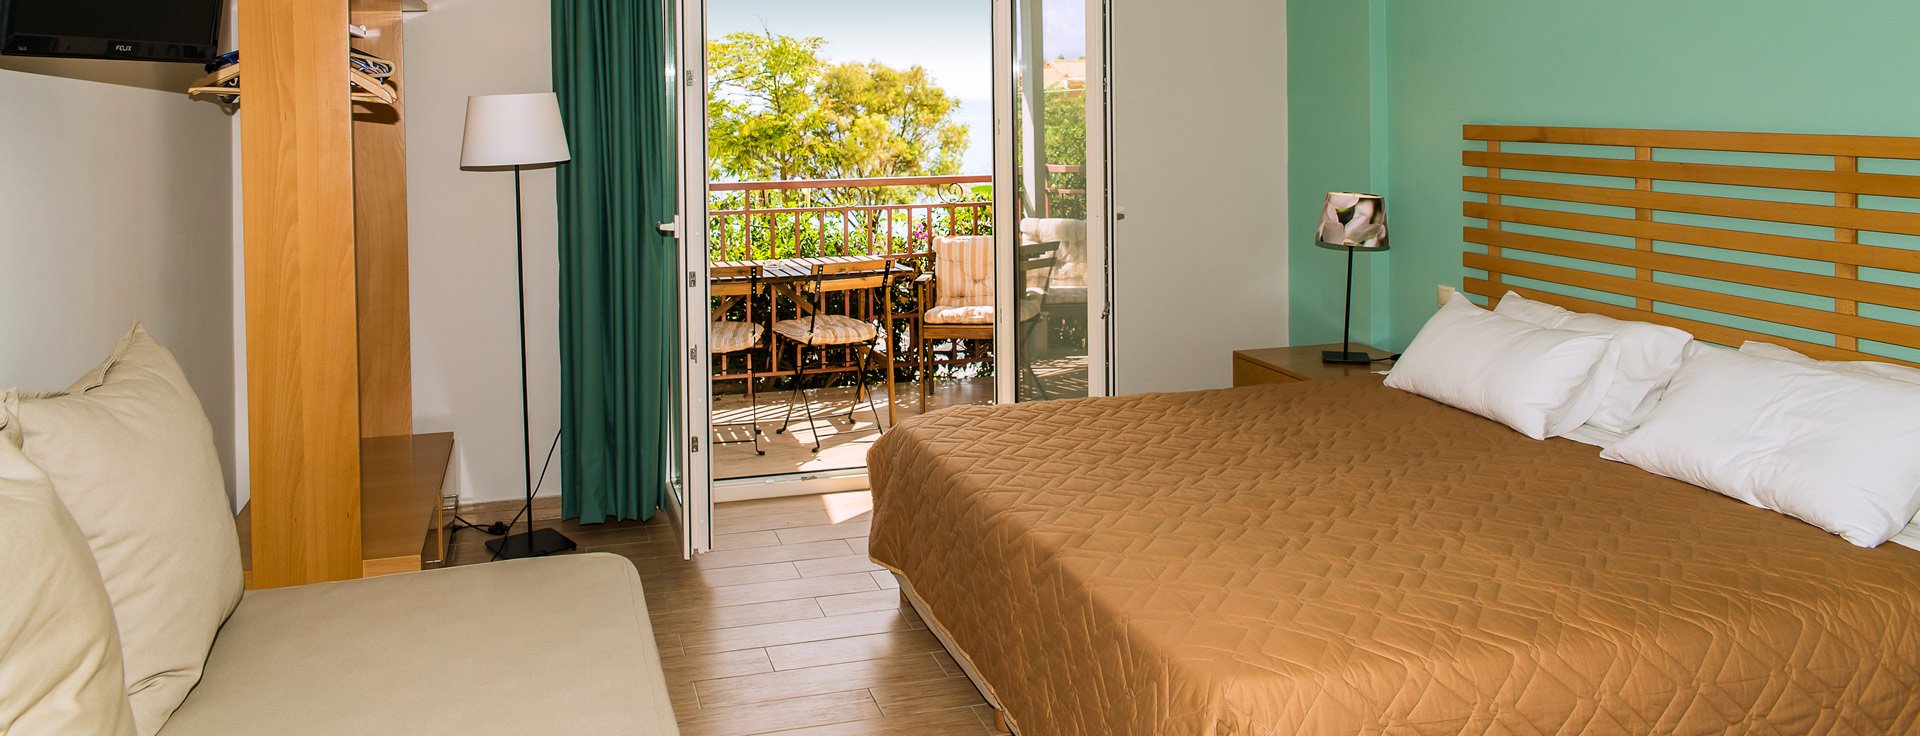 Studio at Lemonia Accommodations with double bed and terrace with garden view.